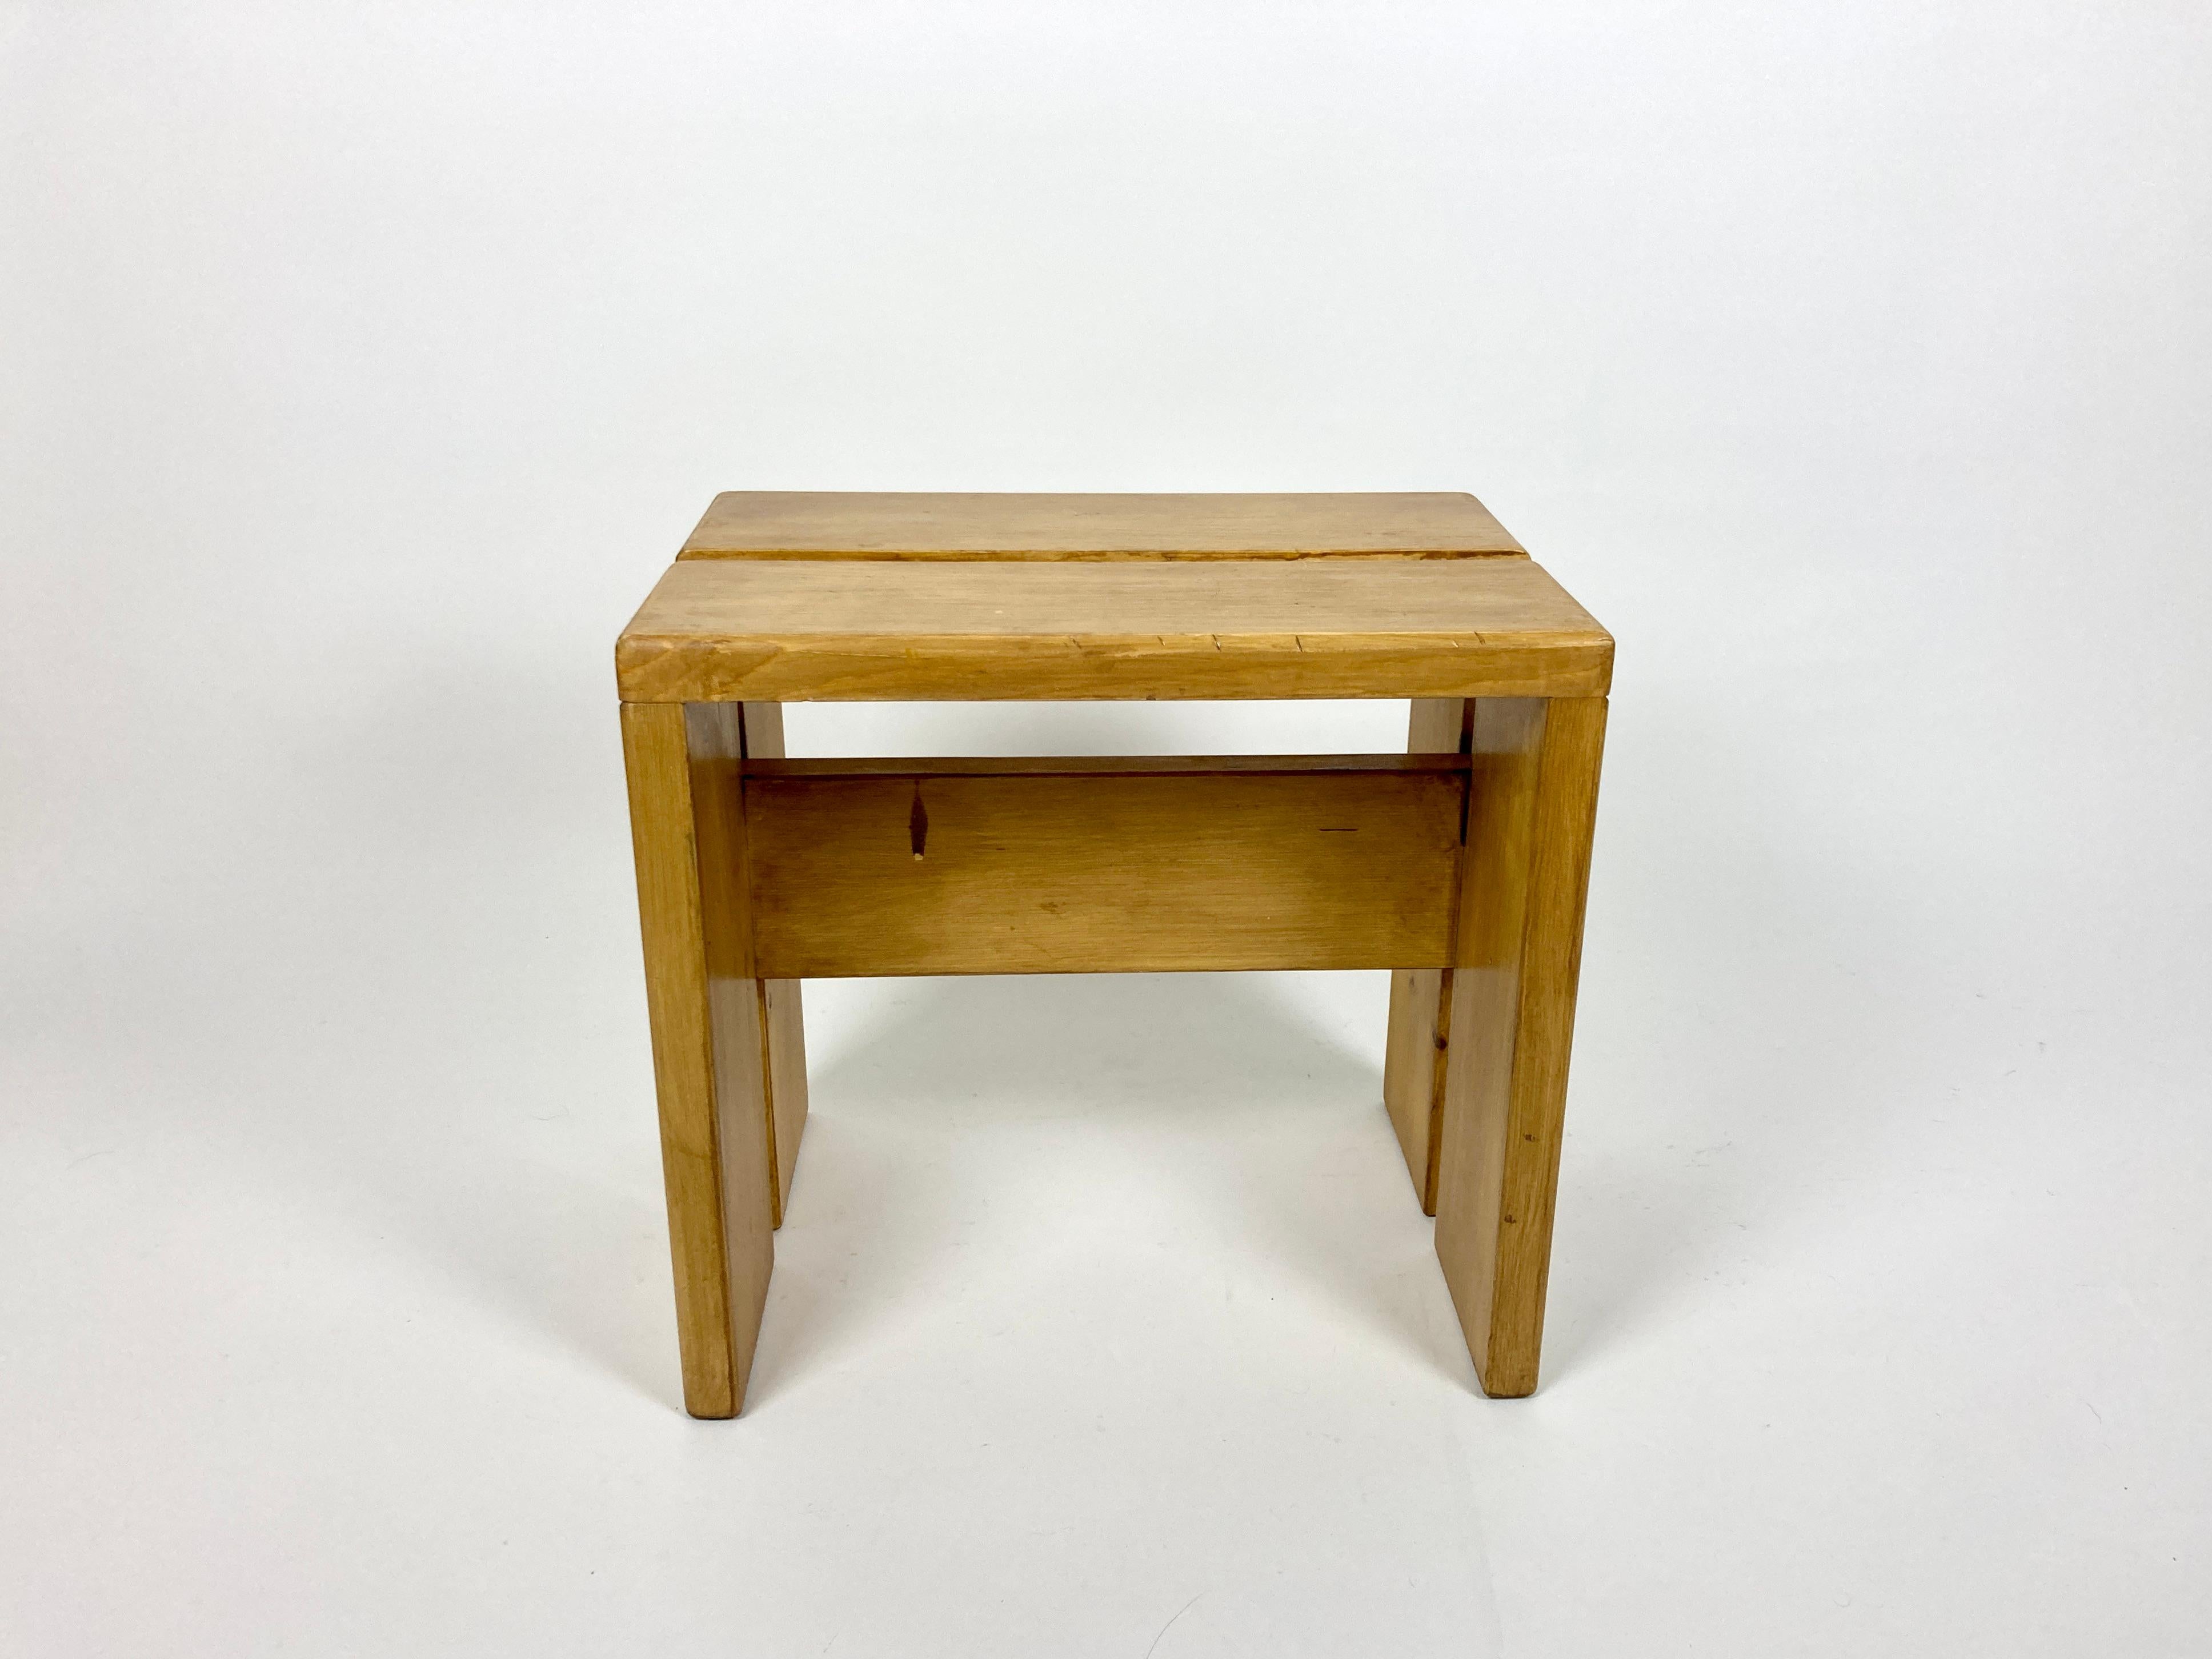 Stool/side table selected by Charlotte Perriand for the Les Arcs resort. France, 1970s.

Made of pine. No structural damage or old repairs, very solid.

Great original condition with wear and patina as pictured, nice rich wood tone. Cleaned,